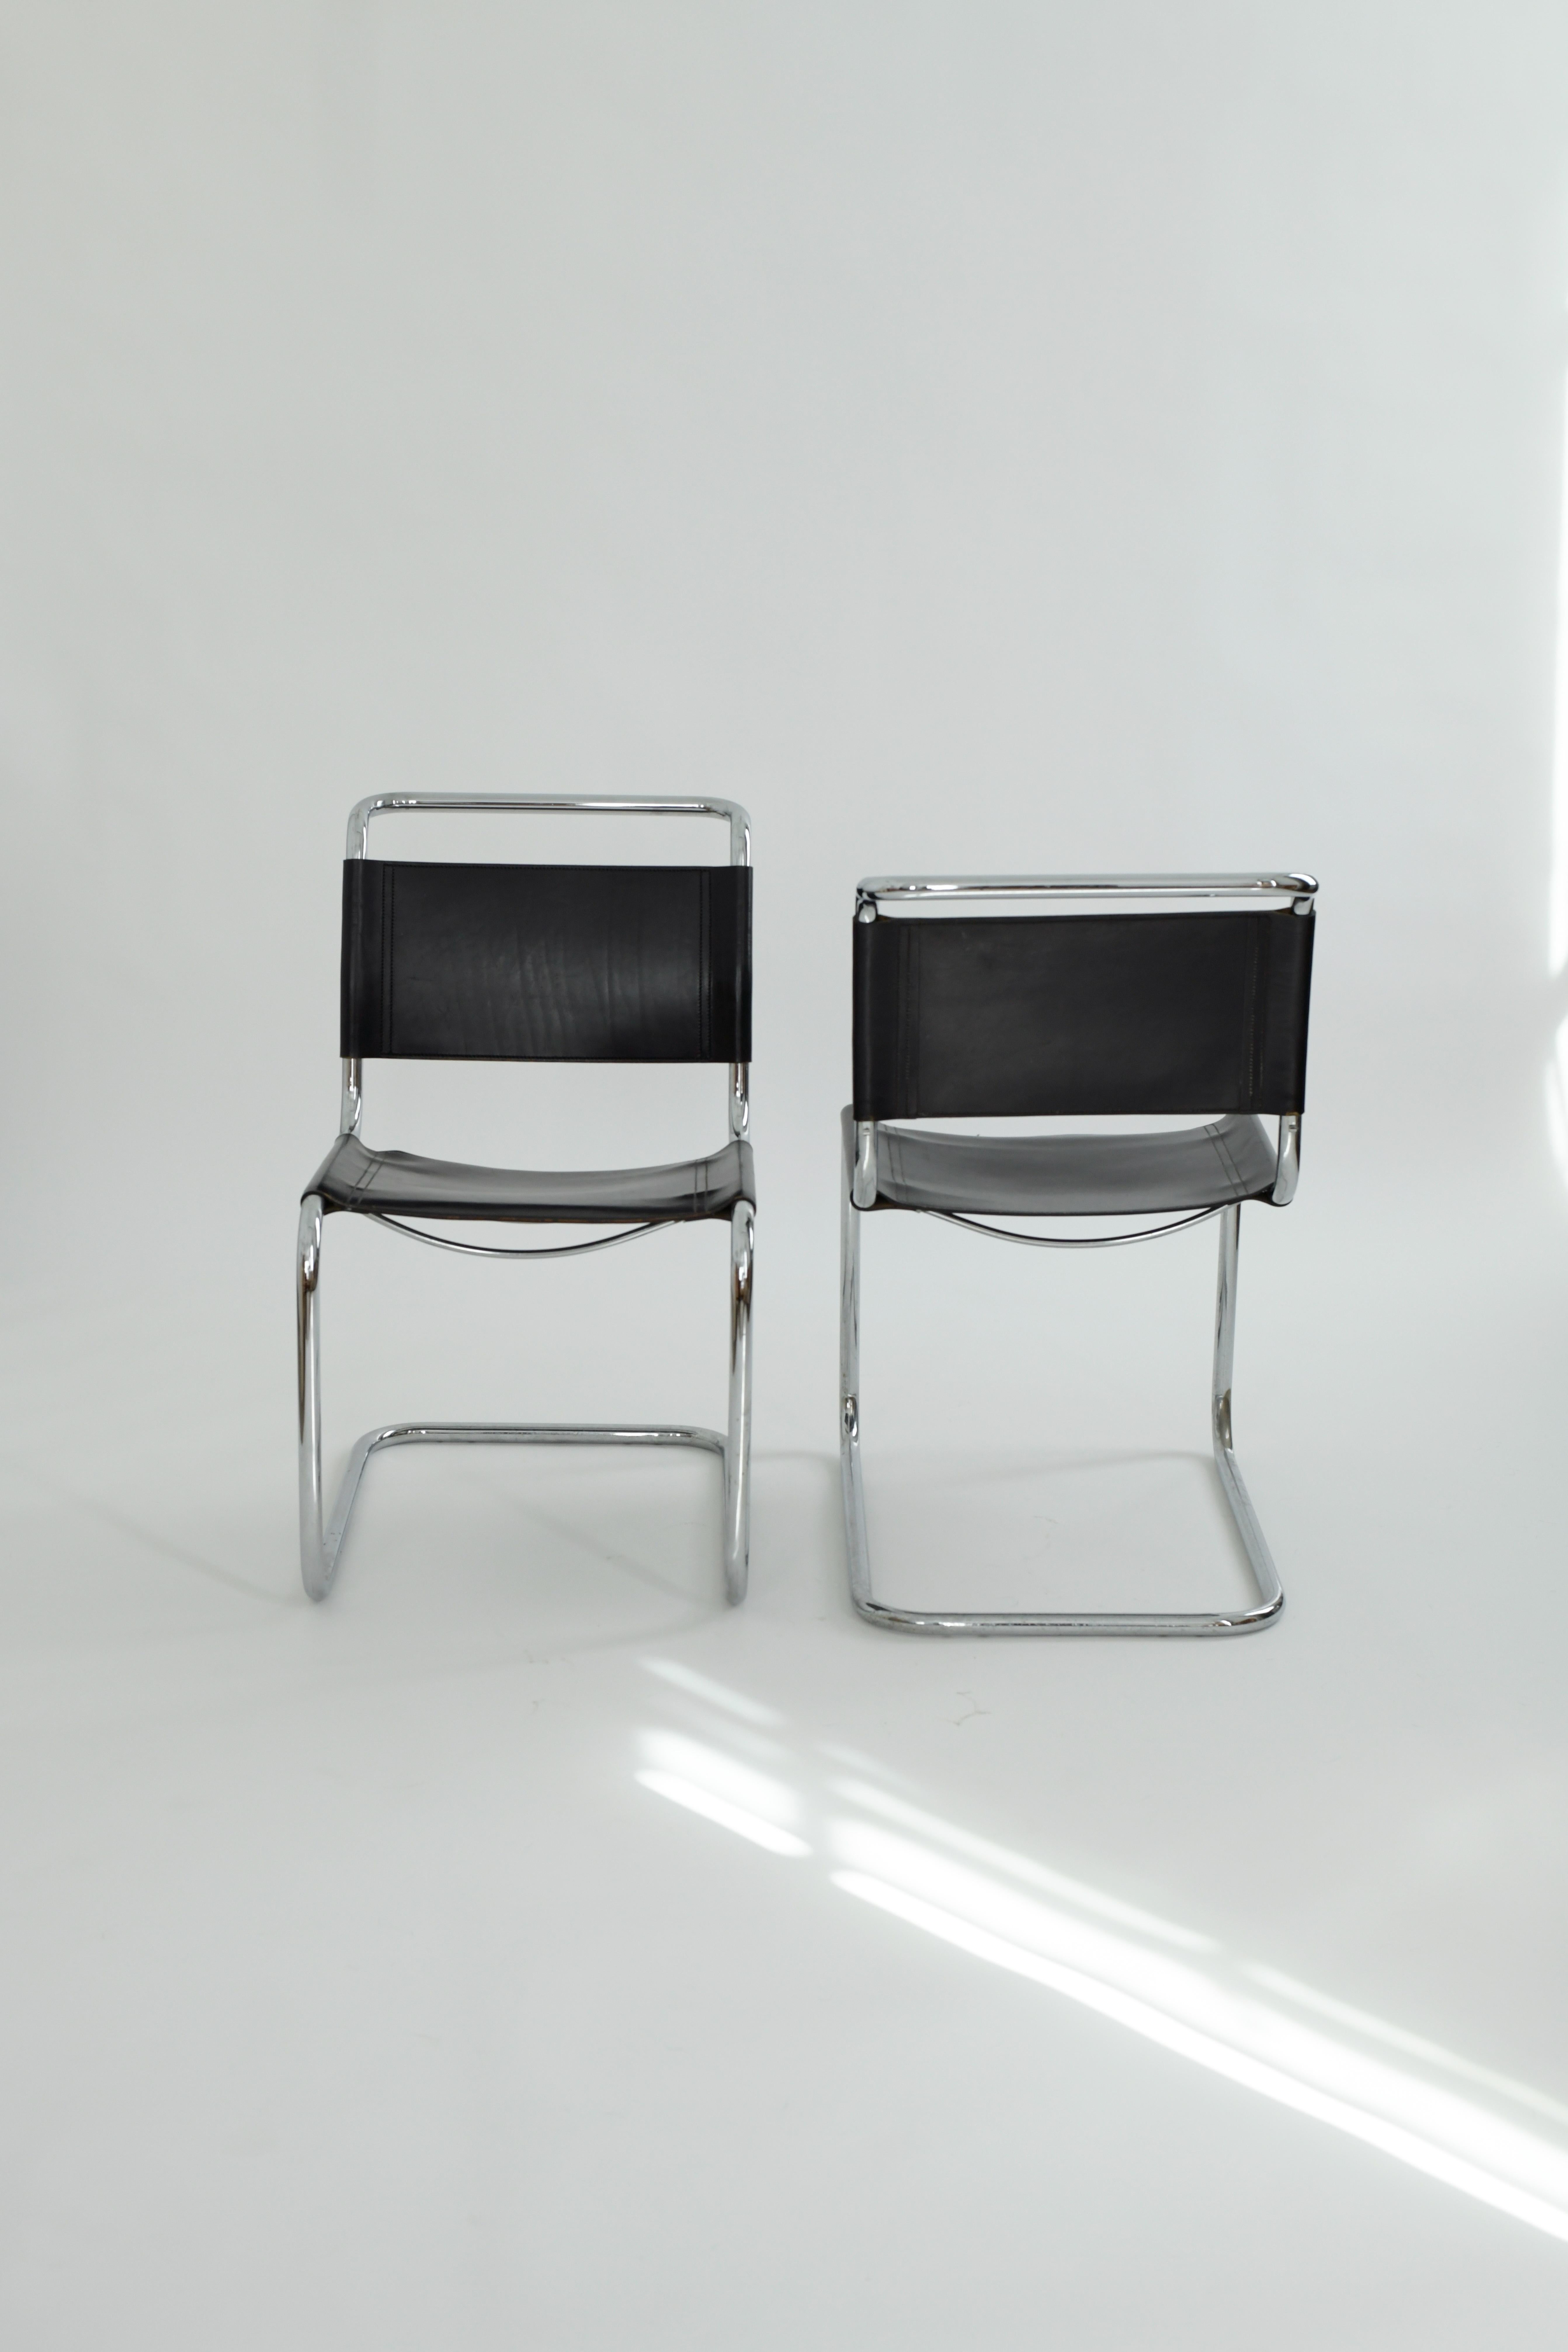 1970s pair of S33 dining chairs by Mart Stam for Fasem, Italy. These iconic bauhaus chairs have beautiful patinated leather seats and backs and are incredibly comfortable due to the cantilevered tubular steel design. This pair is in good vintage